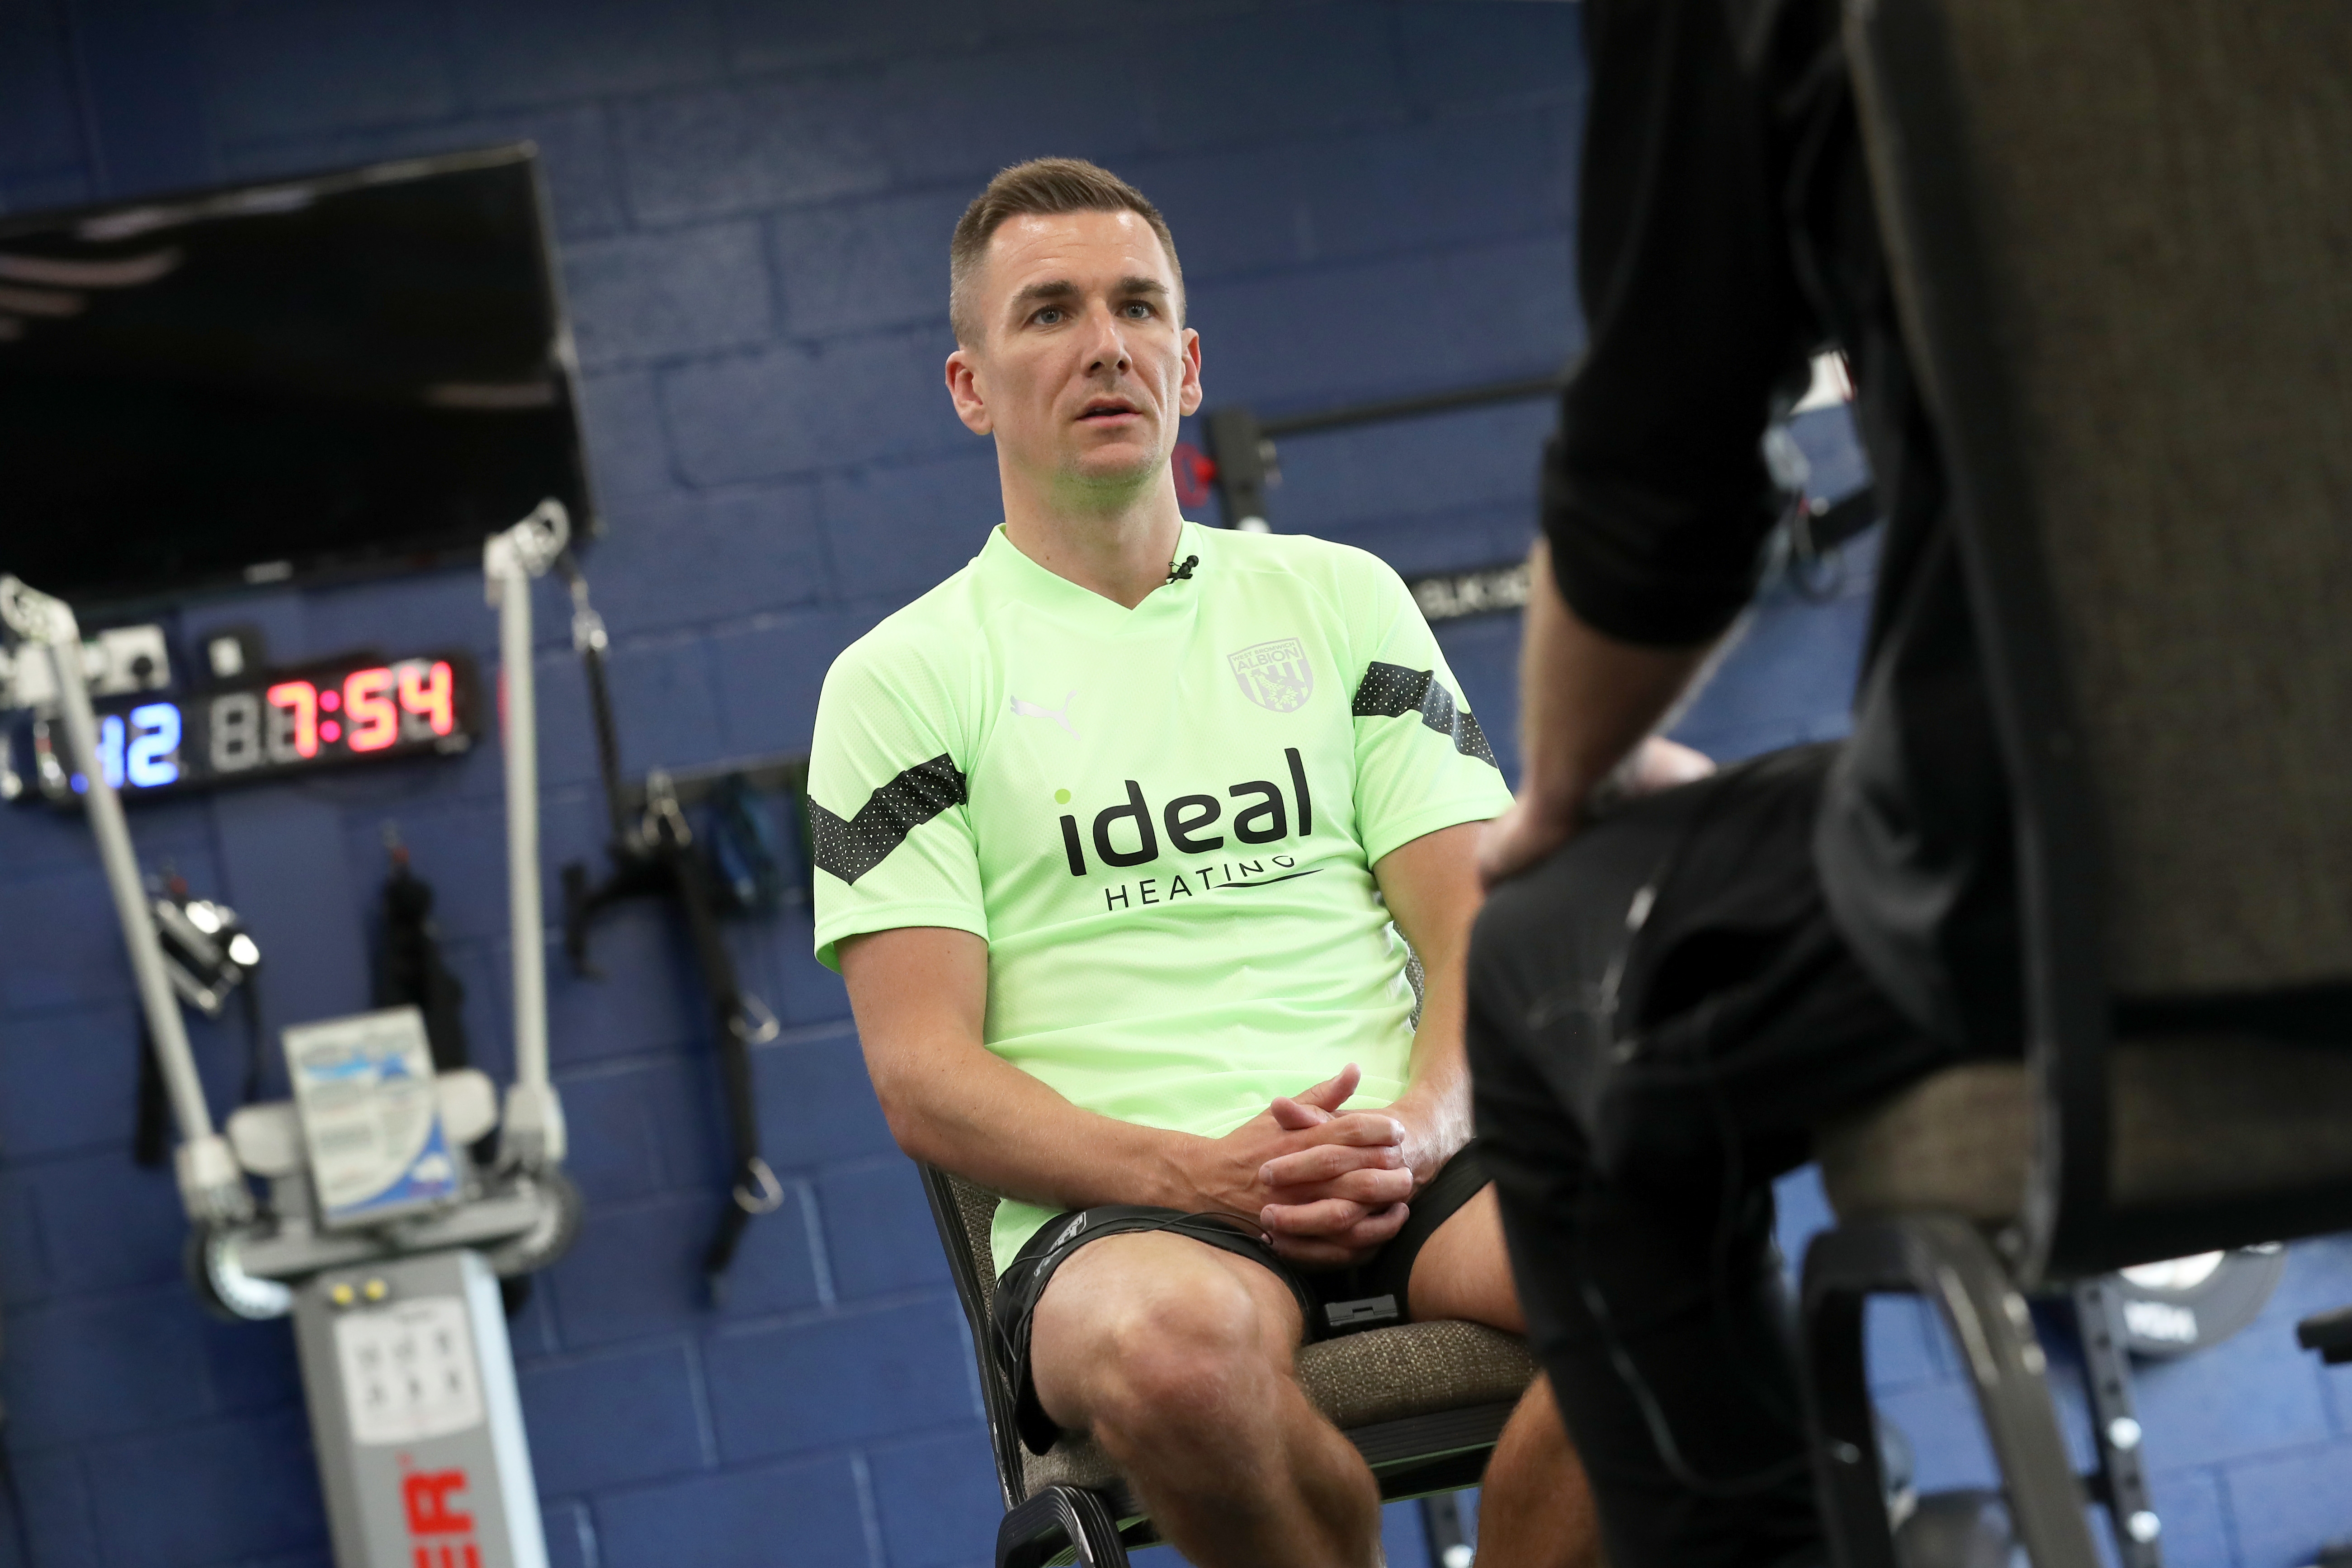 jed wallace: West Brom vs Millwall F.C: Jed Wallace returns to